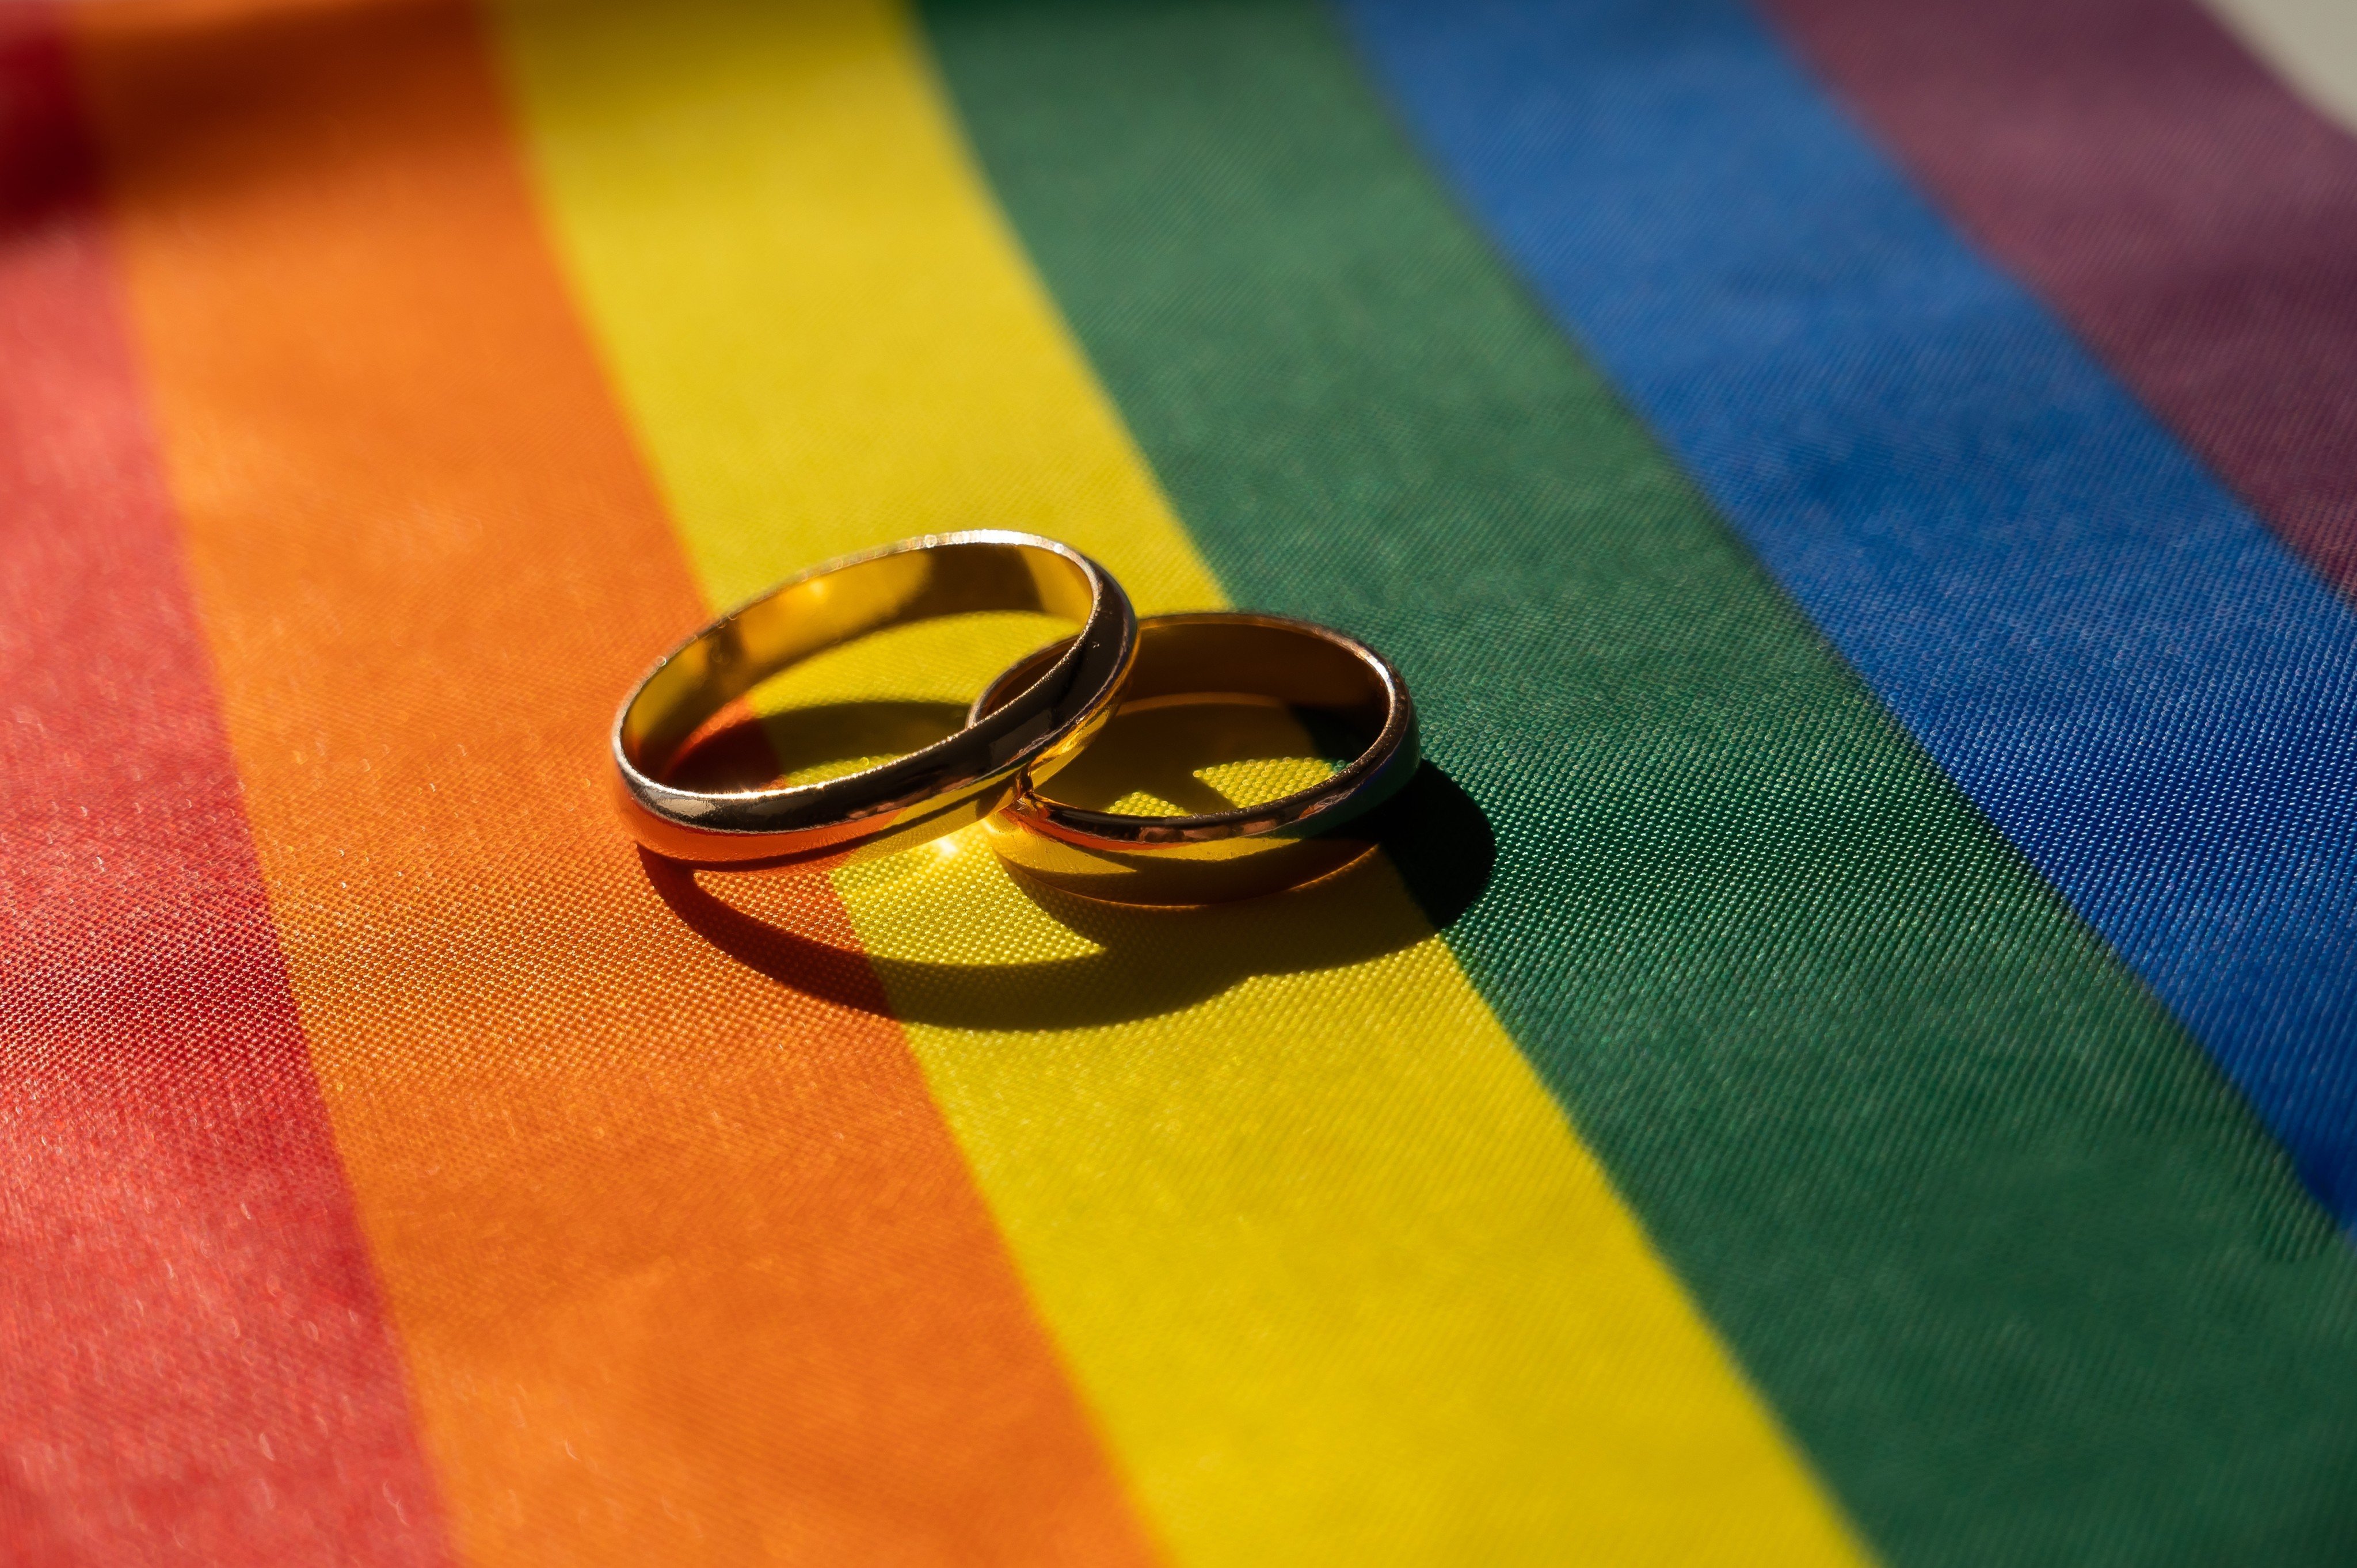 In a landmark decision, the Court of Final Appeal has told the Hong Kong government to create a legal framework for recognising same-sex relationships. Photo: Shutterstock
